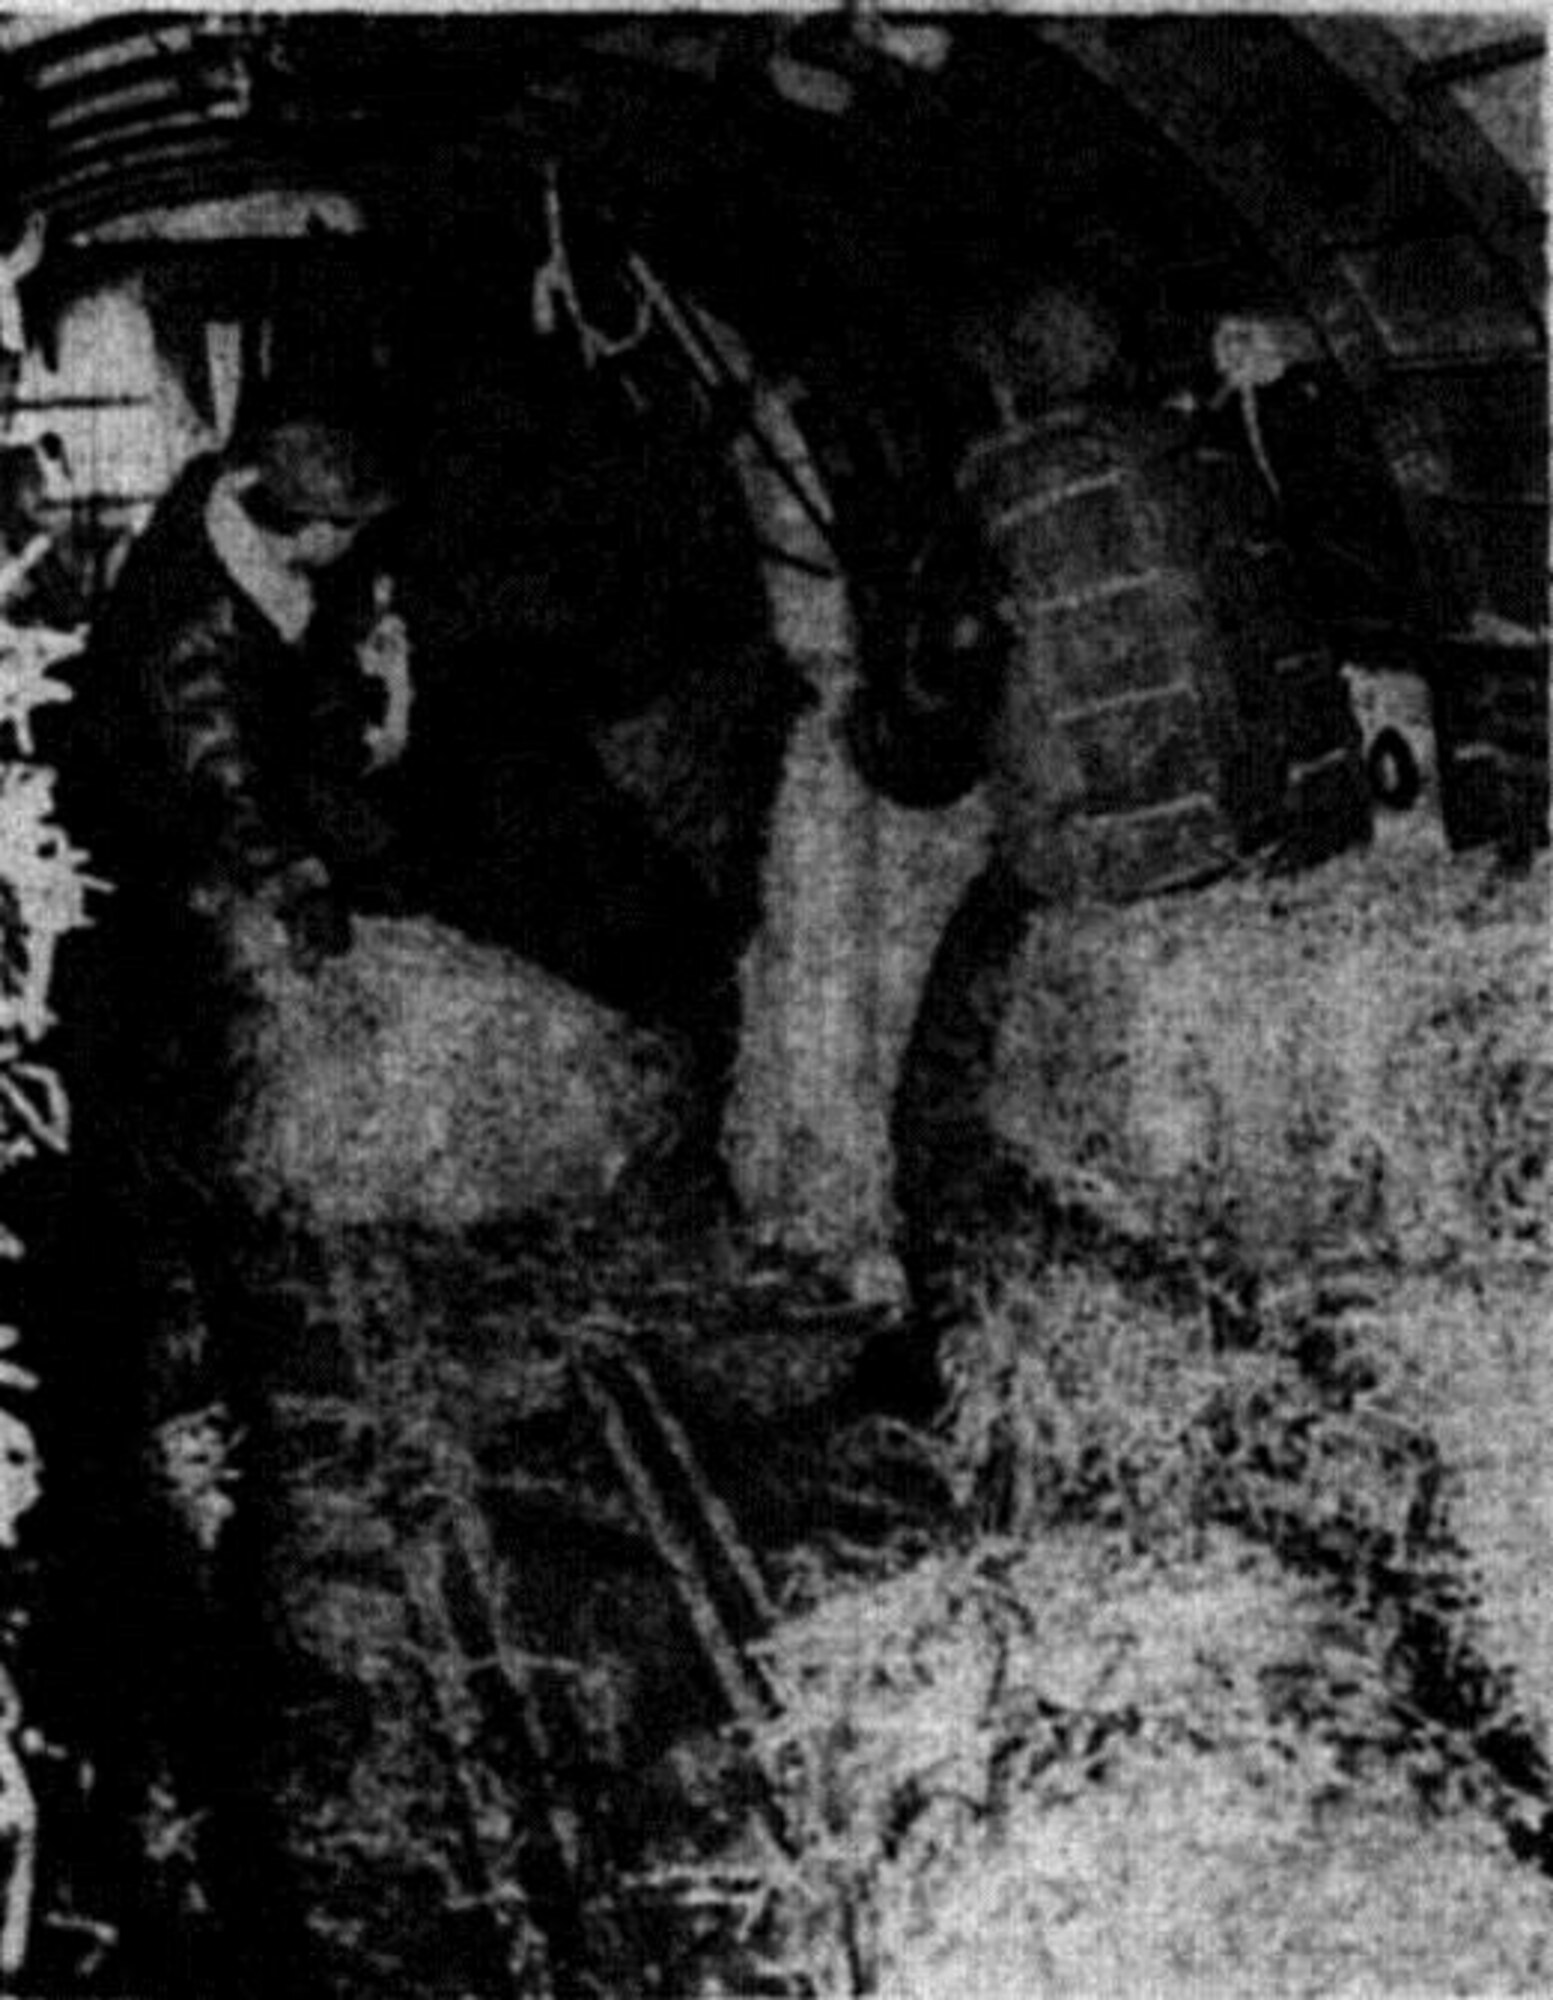 Crewman kick out another bale as hay swirls back into the plane through slipstream pressure.  Strauch (with parachute) and Ward release the 62 pound load, with assistance of Sgt. Donald Beevers, tied to ship (behind Ward). (Photo by Frank Schiro, courtesy La Grande Observer, via Eastern Oregon University Library)